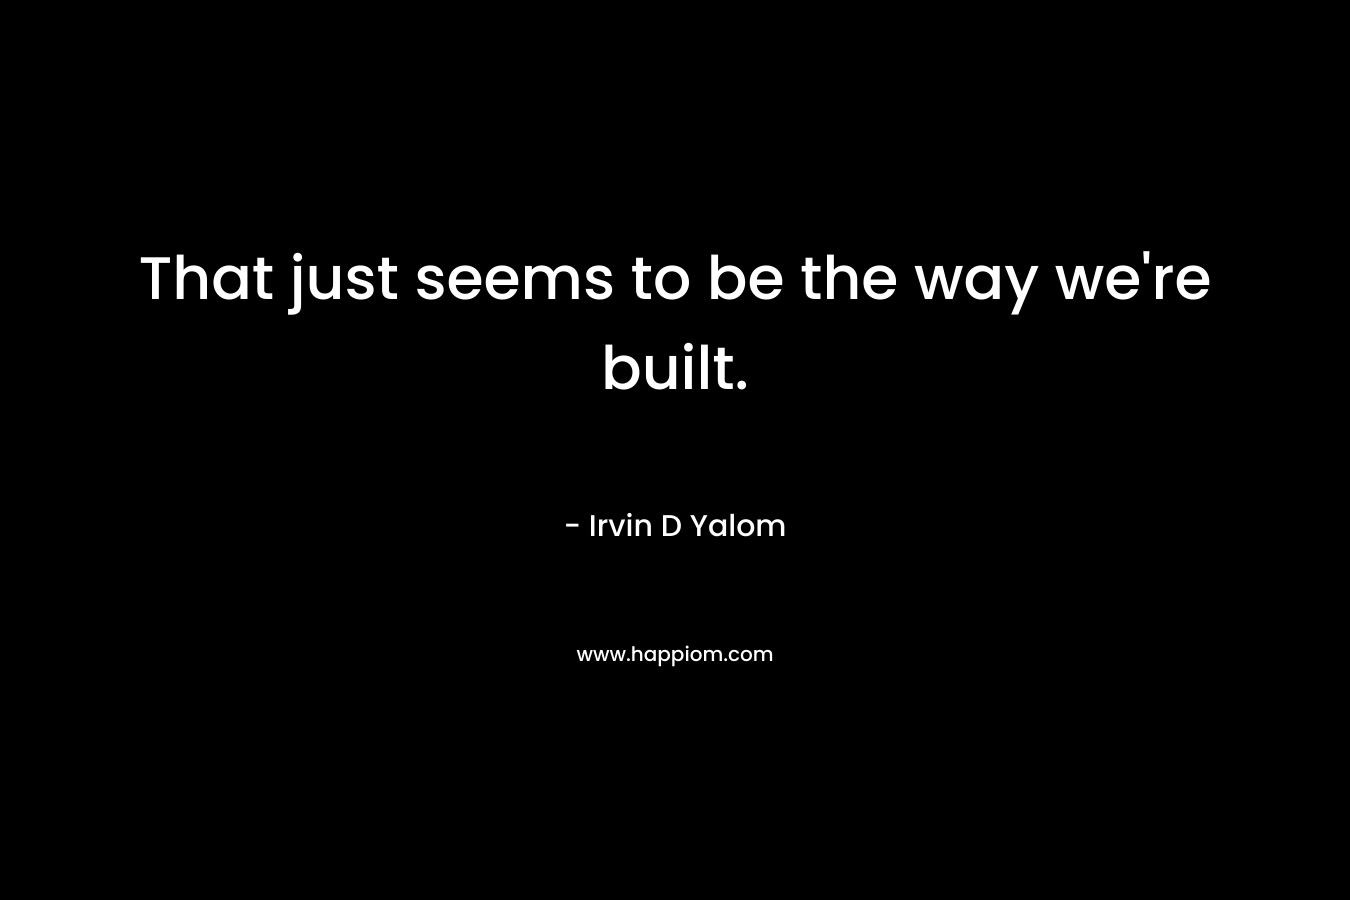 That just seems to be the way we’re built. – Irvin D Yalom